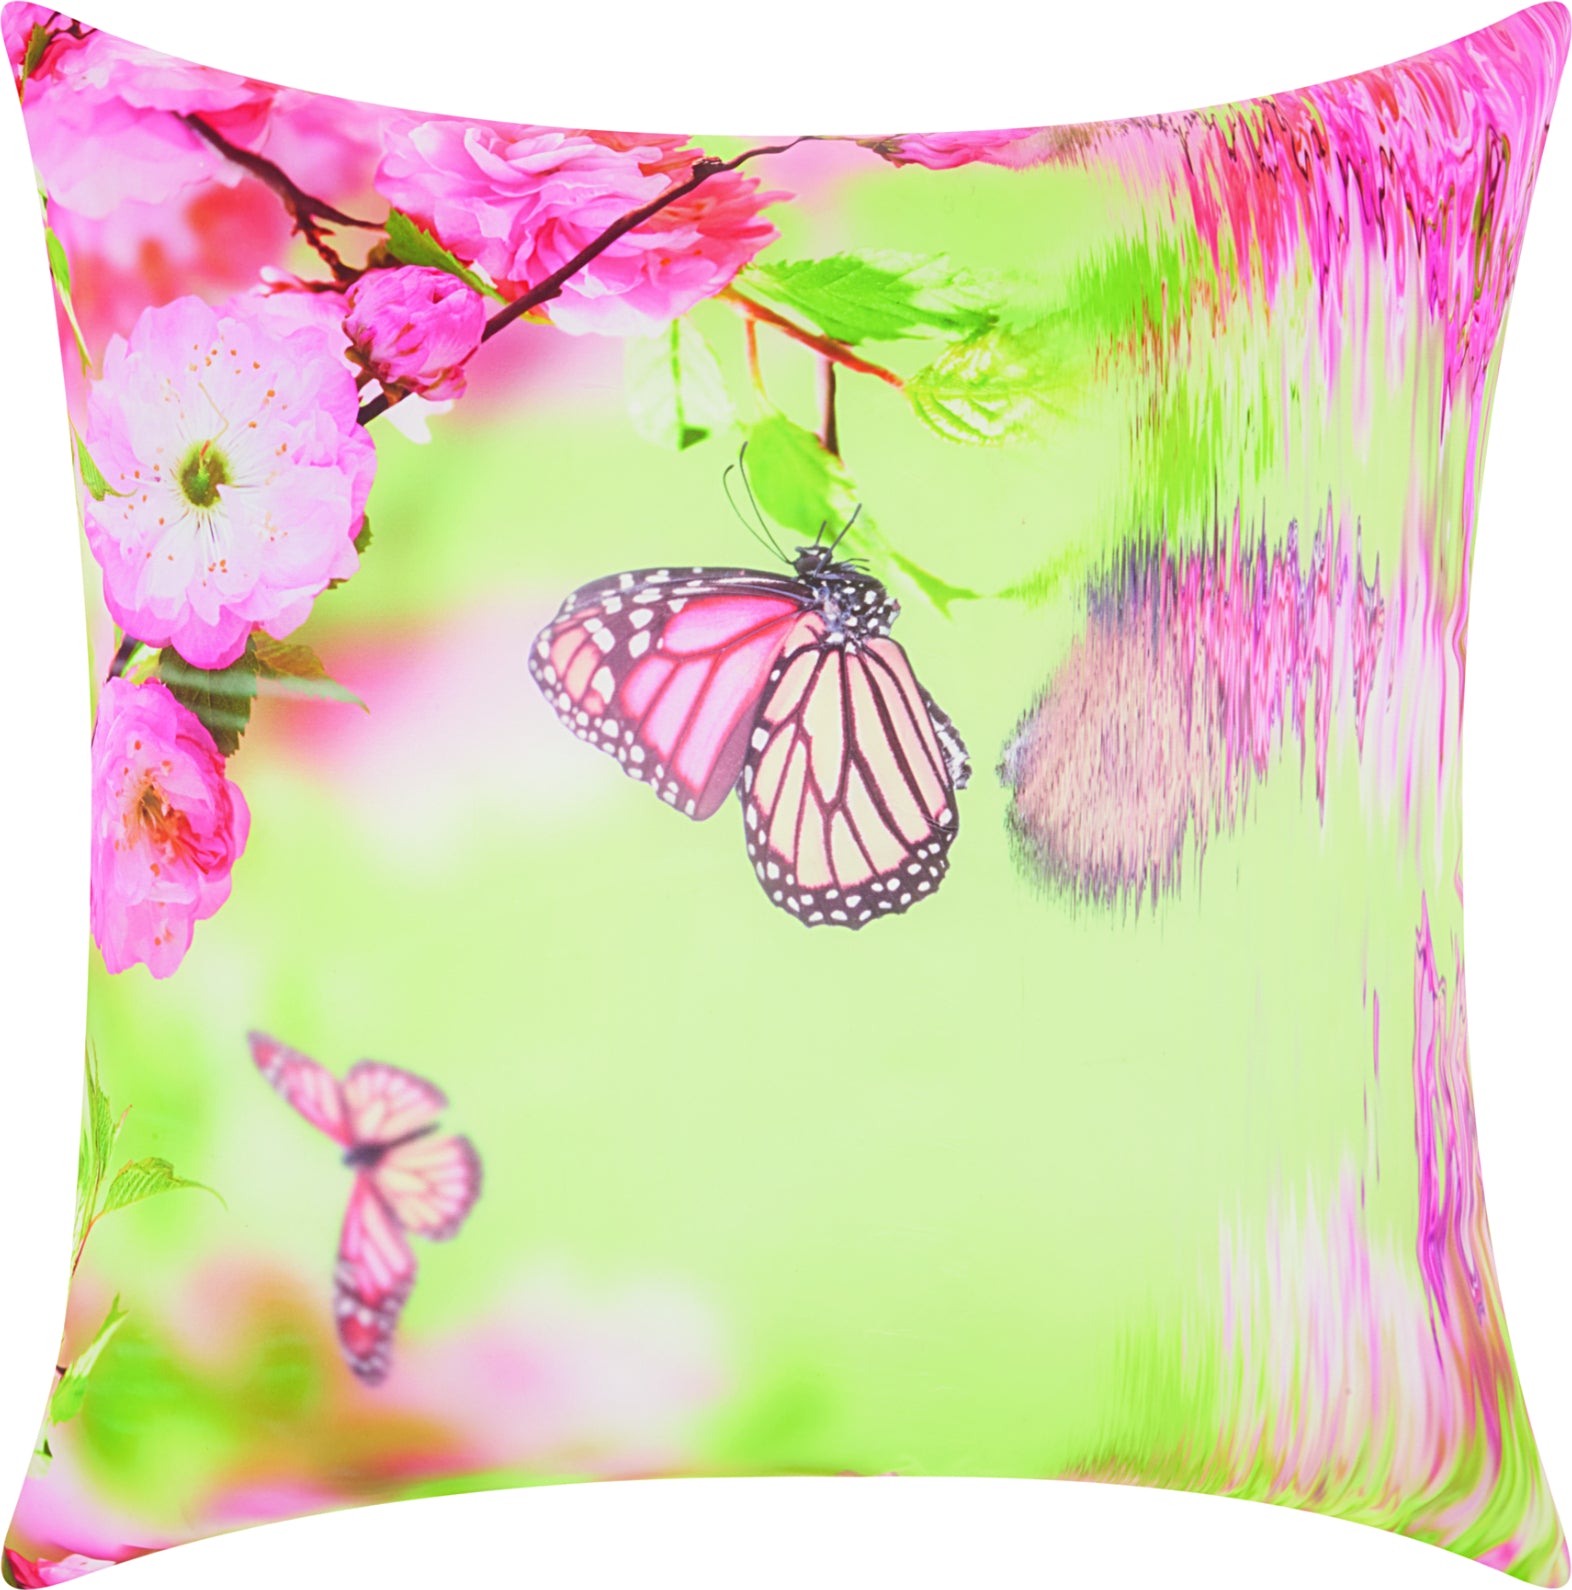 Nourison Outdoor Pillows BUTTERFLY REFLECTION Multicolor by Mina Victory main image